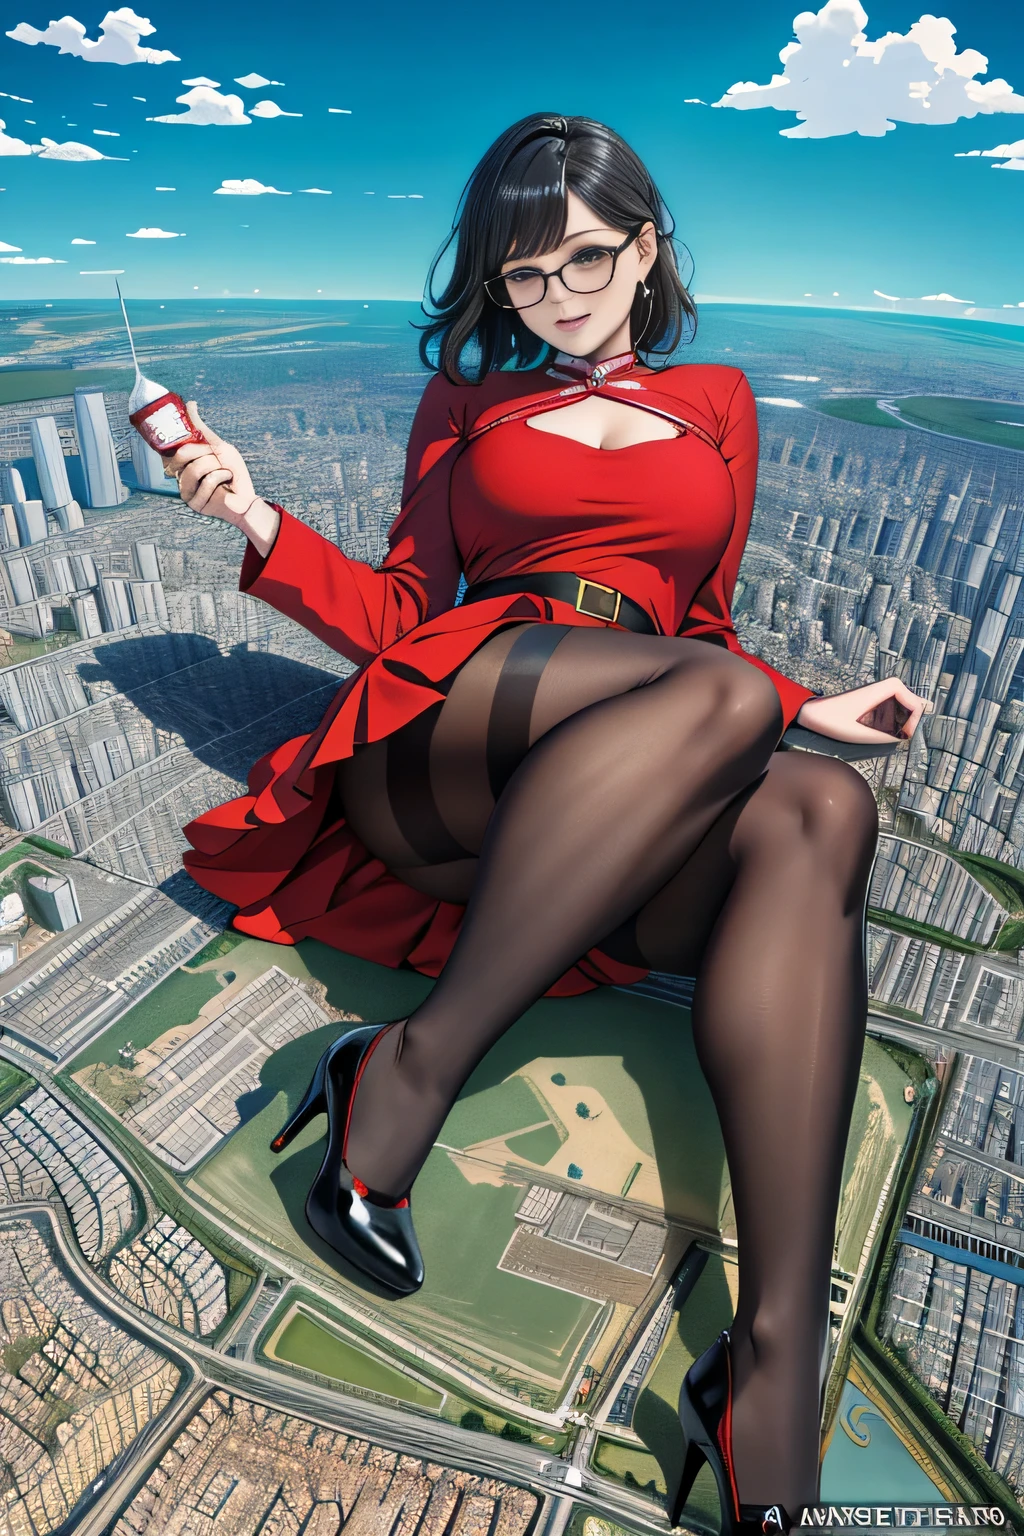 the giant art, 非常に詳細なthe giantショット, the giant, Shorthair, Giant woman bigger than a skyscraper, Wearing rimless glasses, Colossal , BIG ASS, Red Santa Dresses, Black pantyhose, Her shoes are high heels and stiletto red sandals., very small metropolis, Trying to destroy a miniature metropolis, Full body depiction, nffsw, giga the giant, the giant, Black pantyhose, Stomping City,crash city,Small town,micro city,